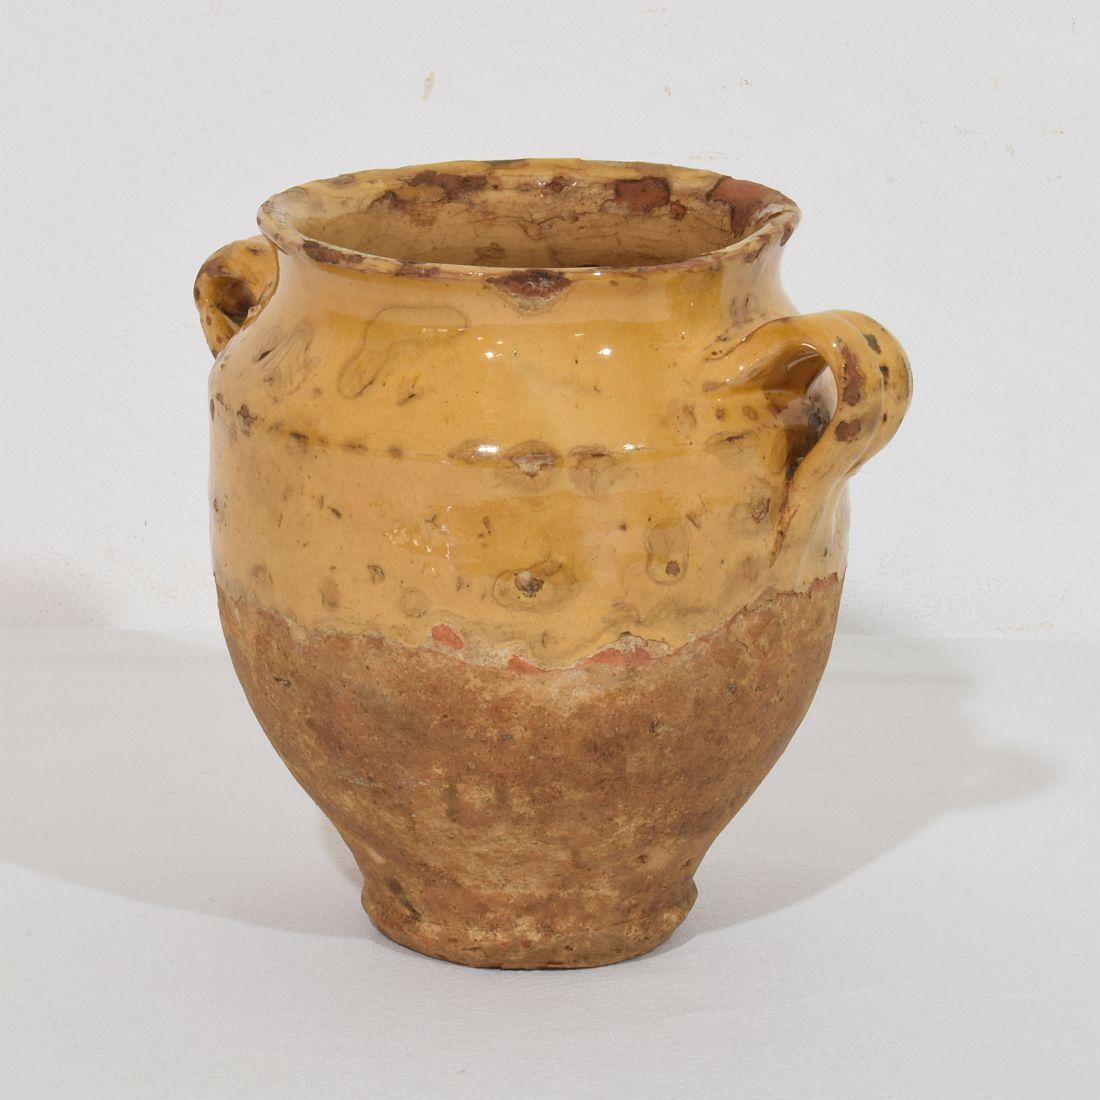  Beautiful small confit jar with its characteristic yellow glaze.
Confit jars were used primarily in the South of France for the preservation of meats such as duck or goose for dishes such as cassoulet or foie gras. The bottom halves were left